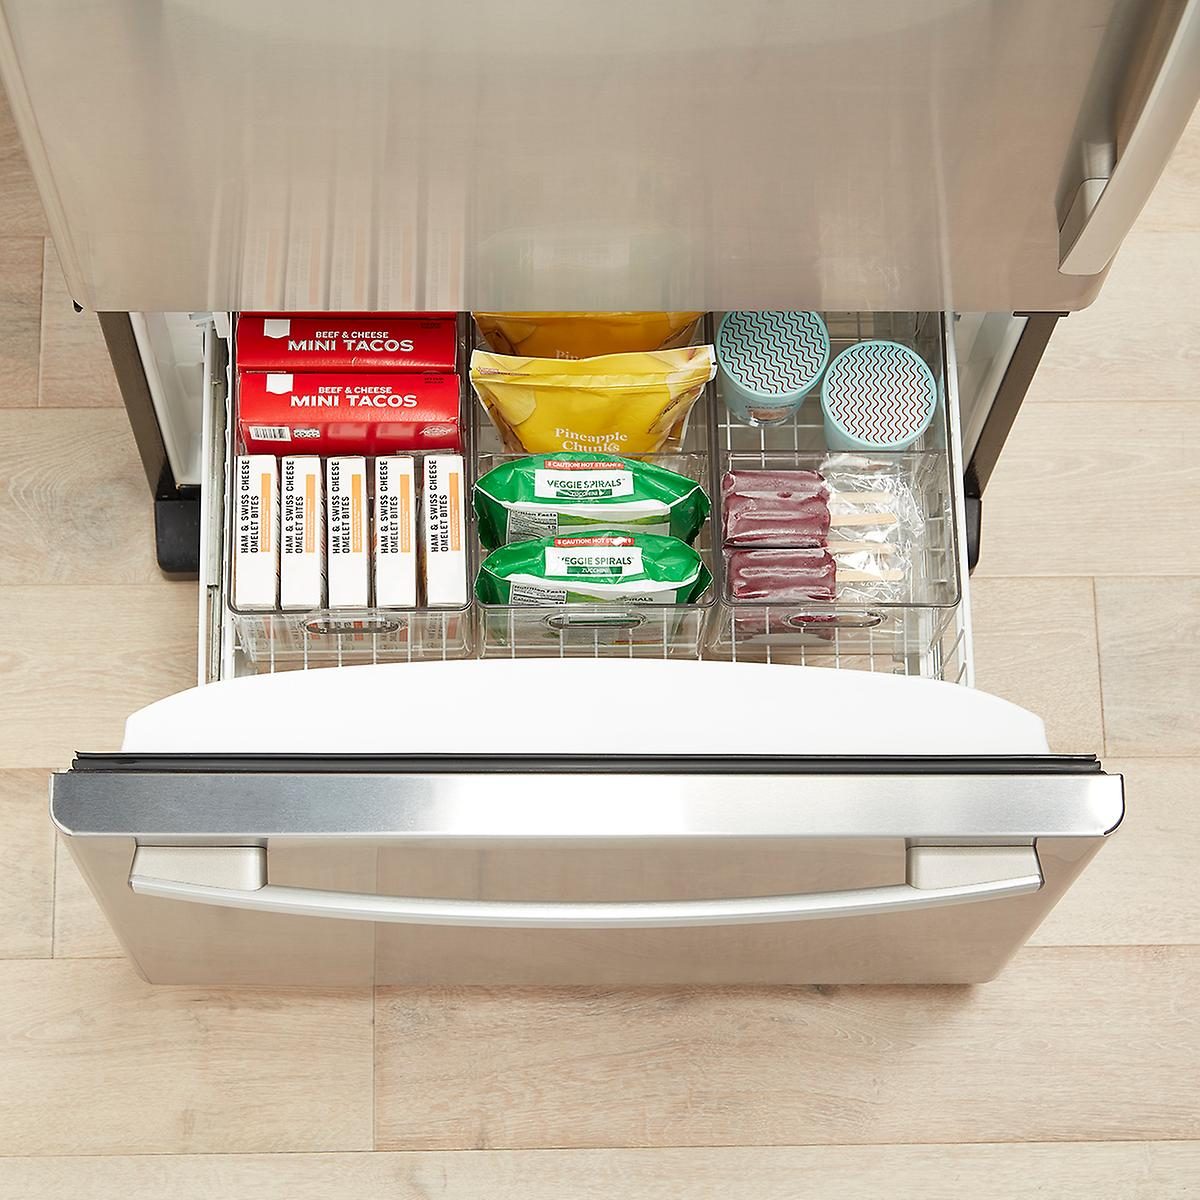 Tips for Organizing the Freezer and Keeping It Tidy